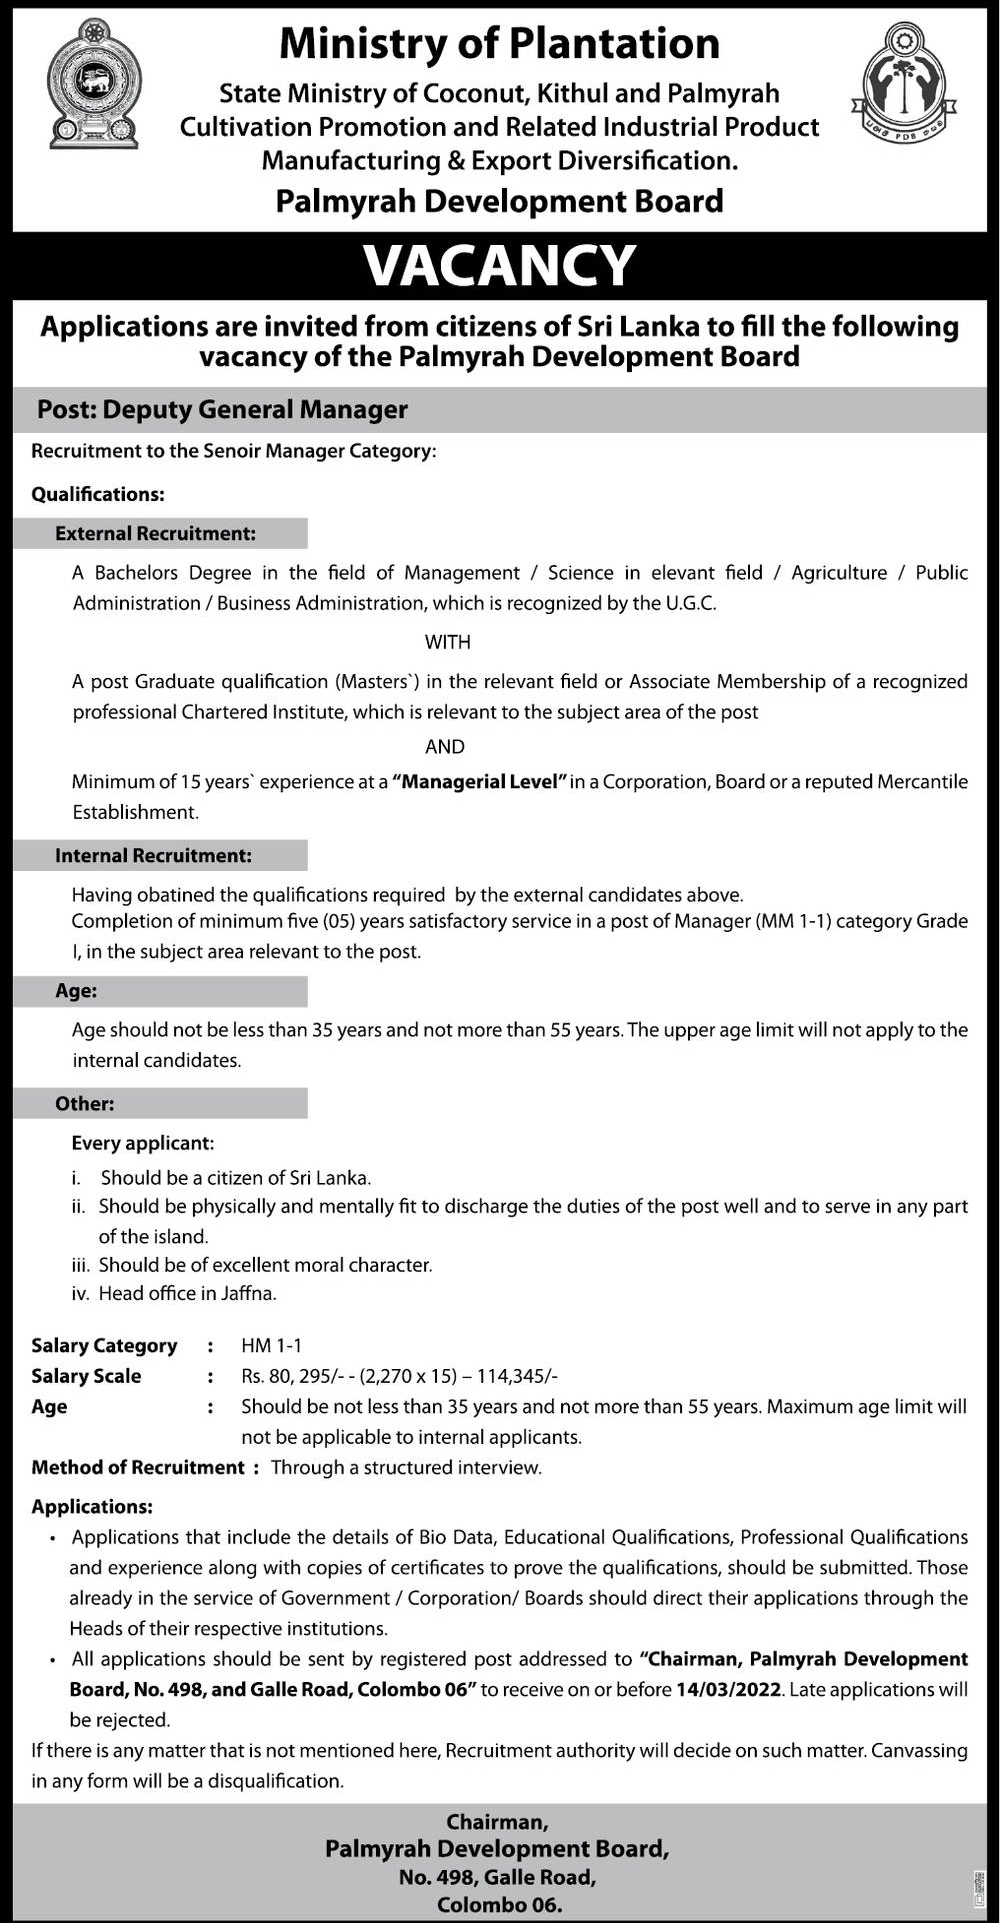 Vacancies in Ministry of Plantation Industries 2022